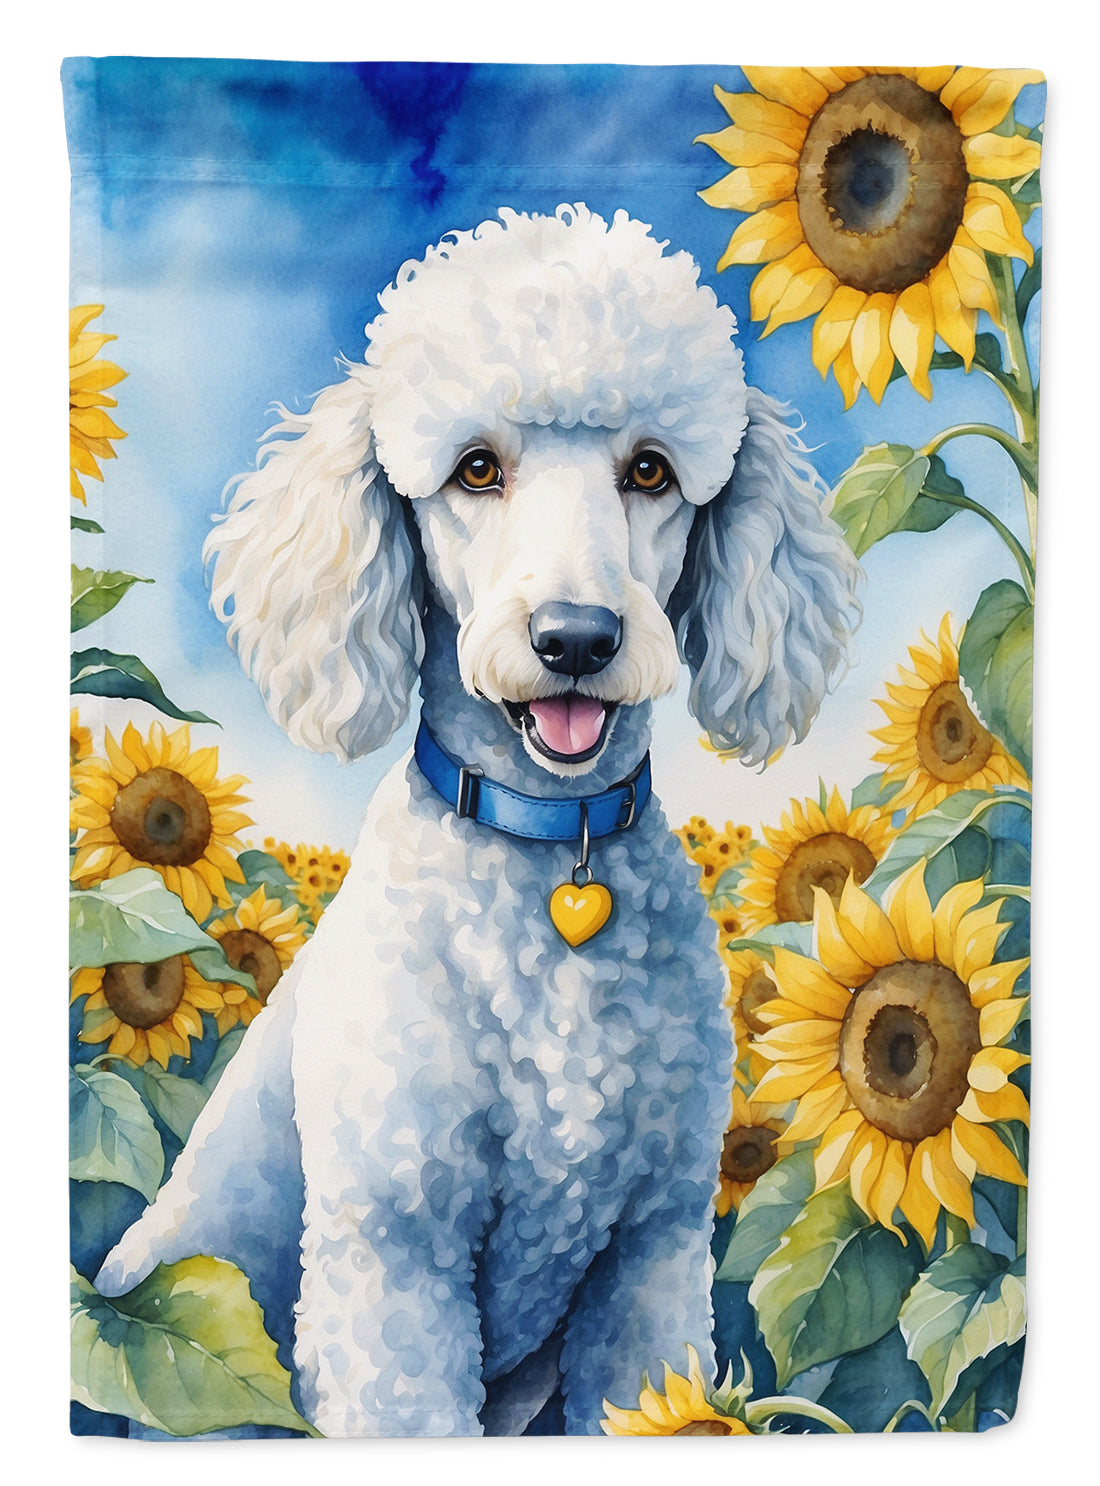 Buy this White Poodle in Sunflowers Garden Flag